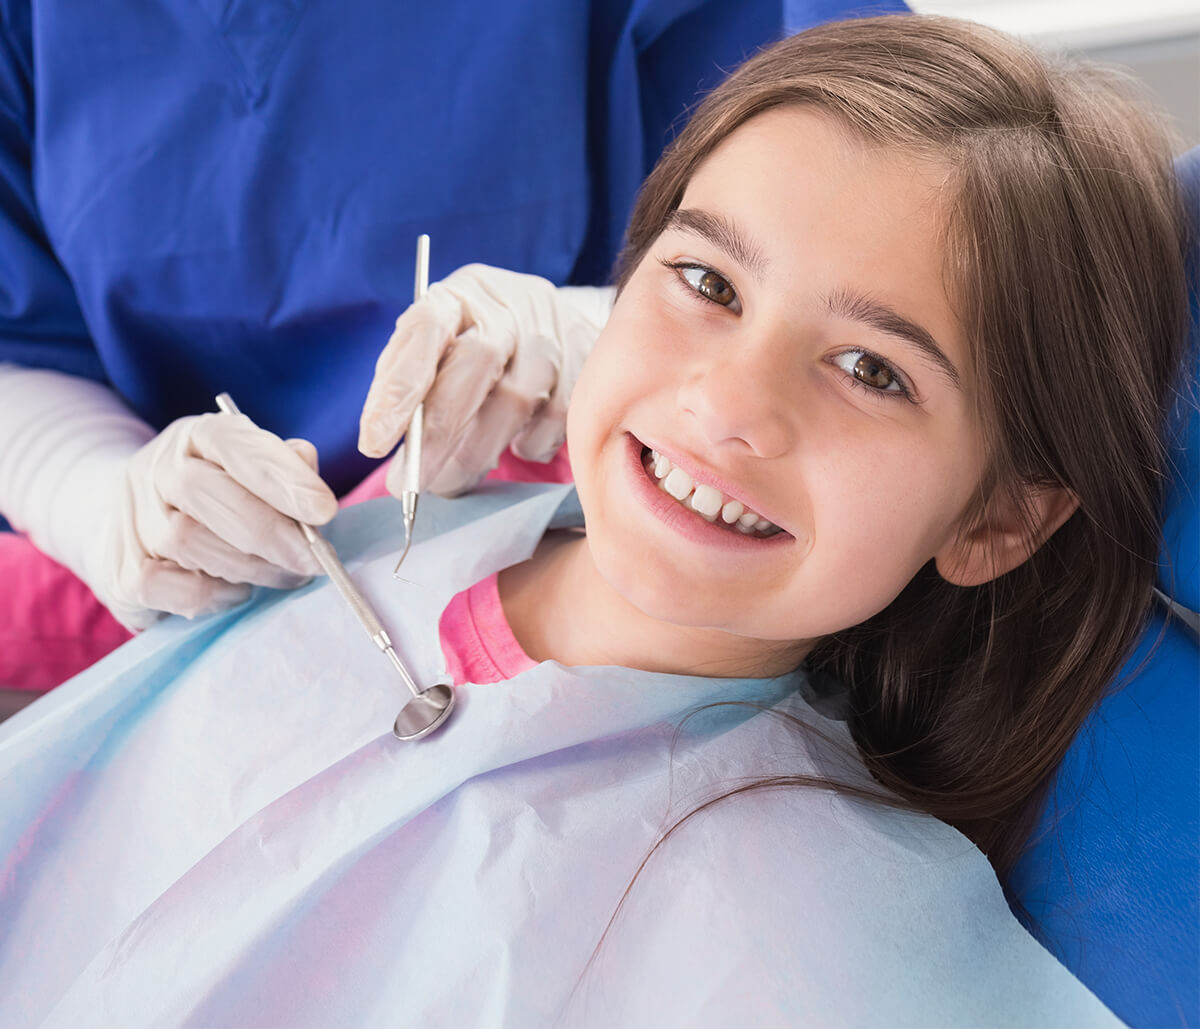 Pediatric Tooth Extractions in Greensboro NC Area